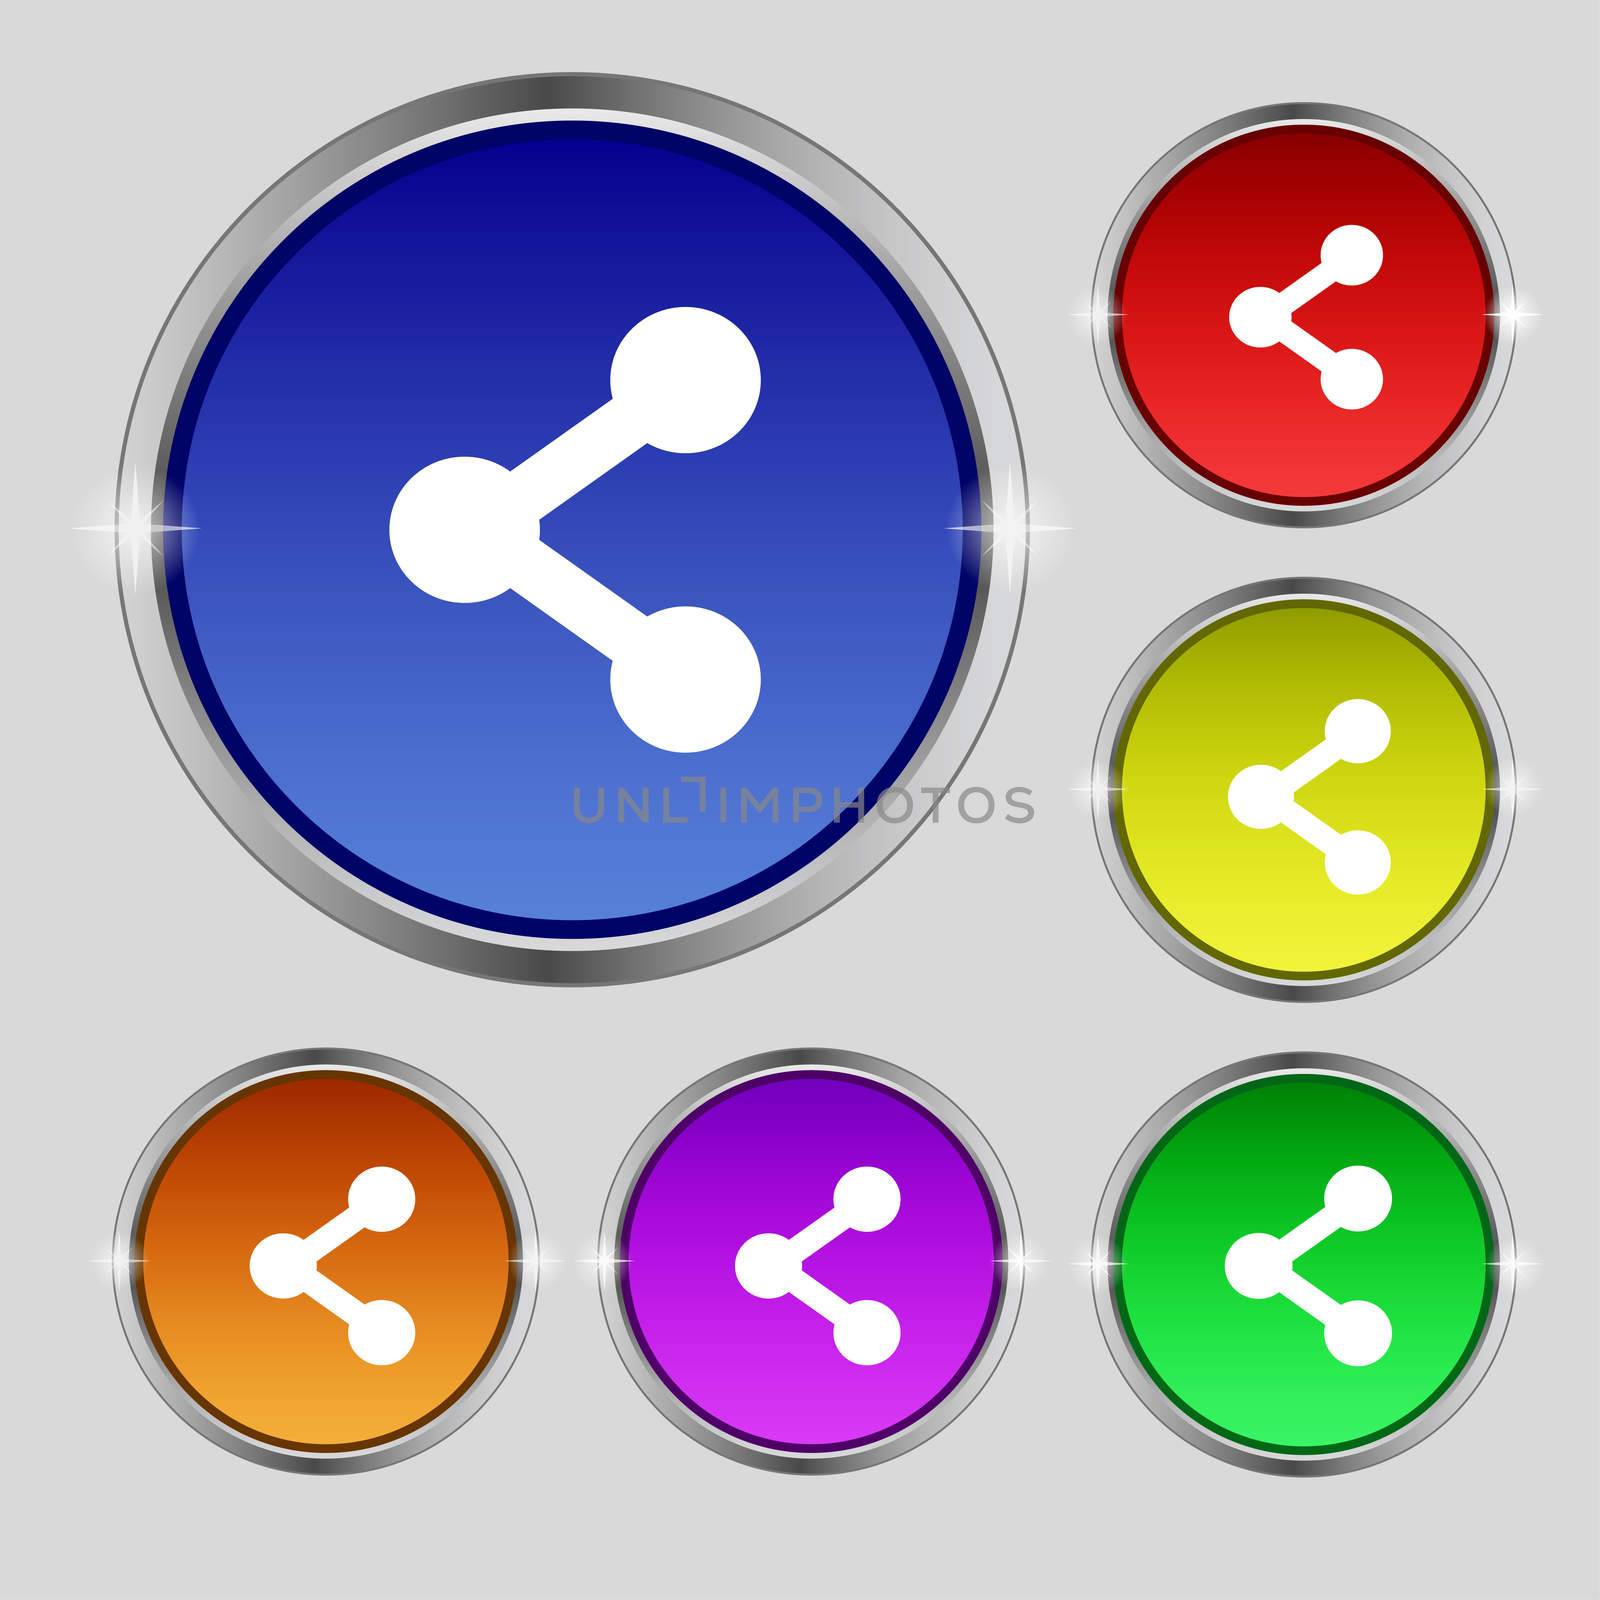 Share icon sign. Round symbol on bright colourful buttons. illustration